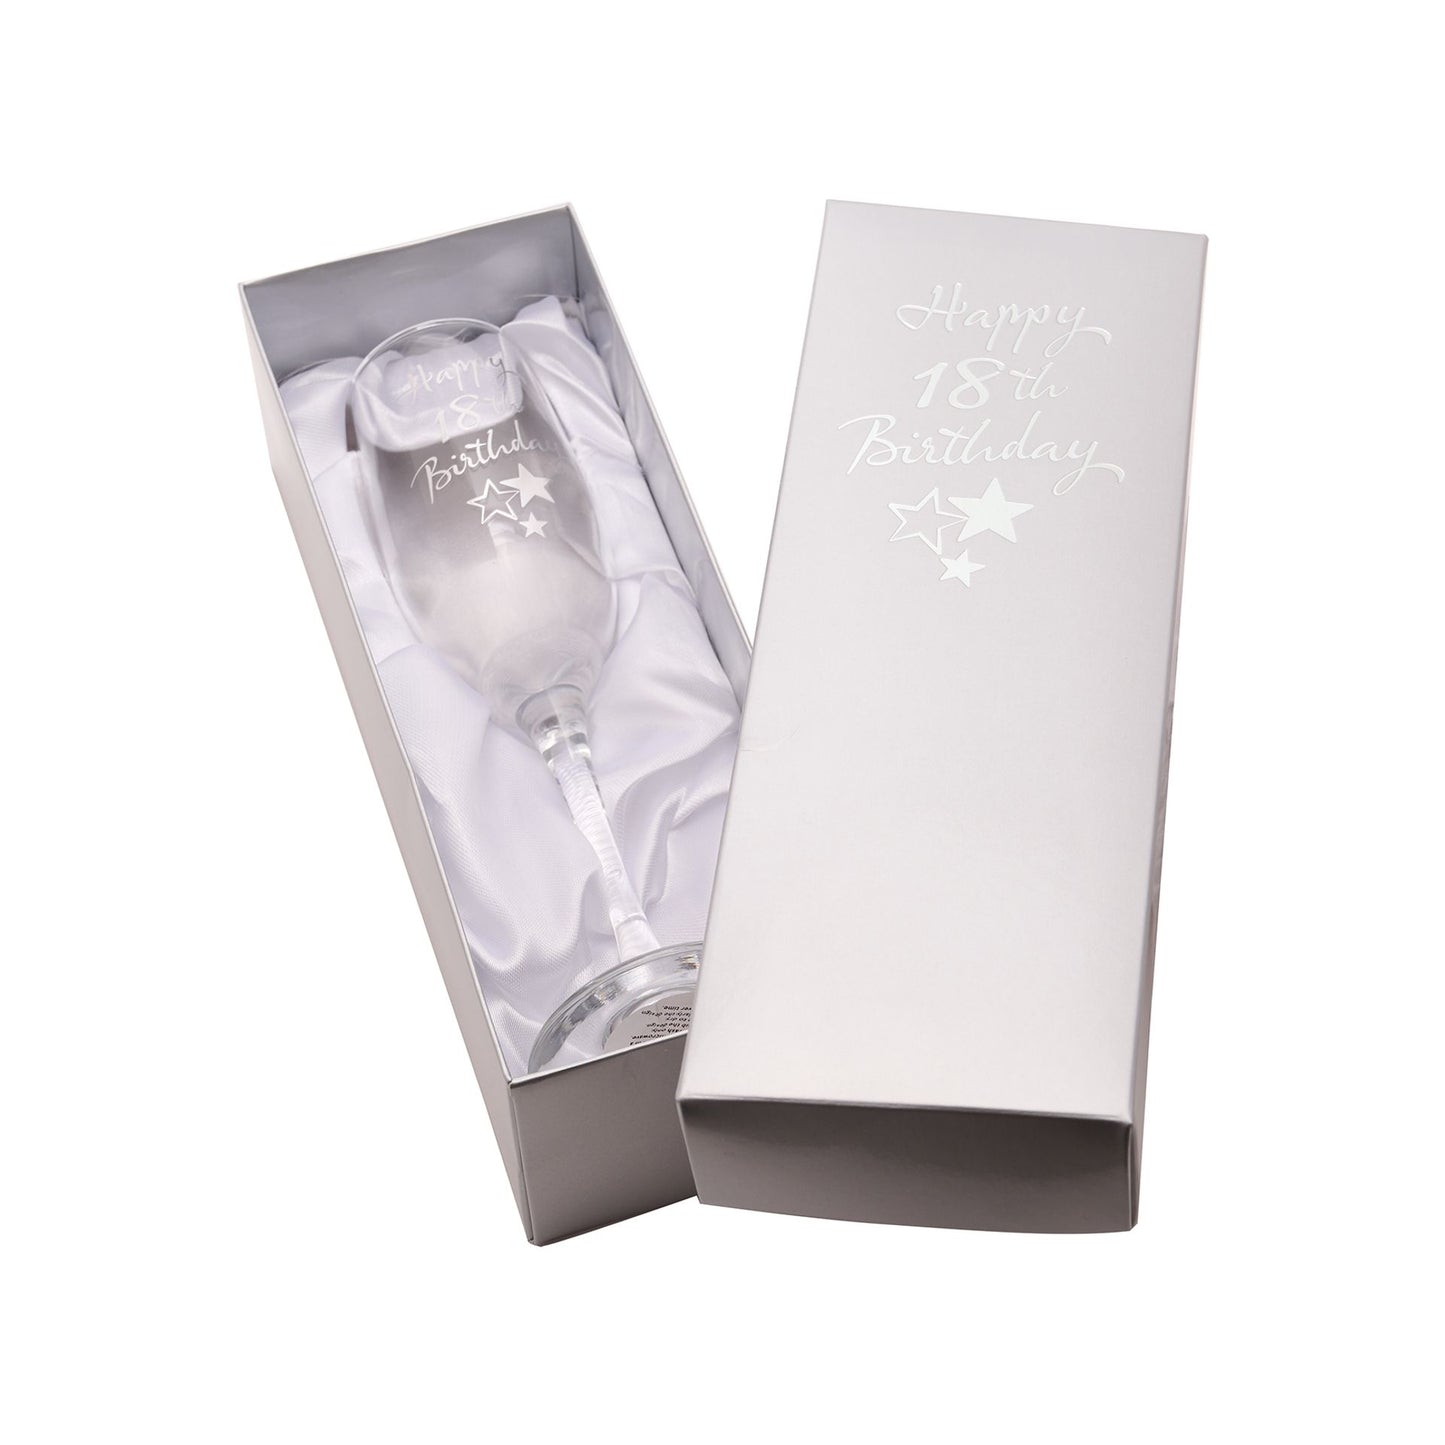 Happy 18th Birthday Champagne Flute with Gift Box